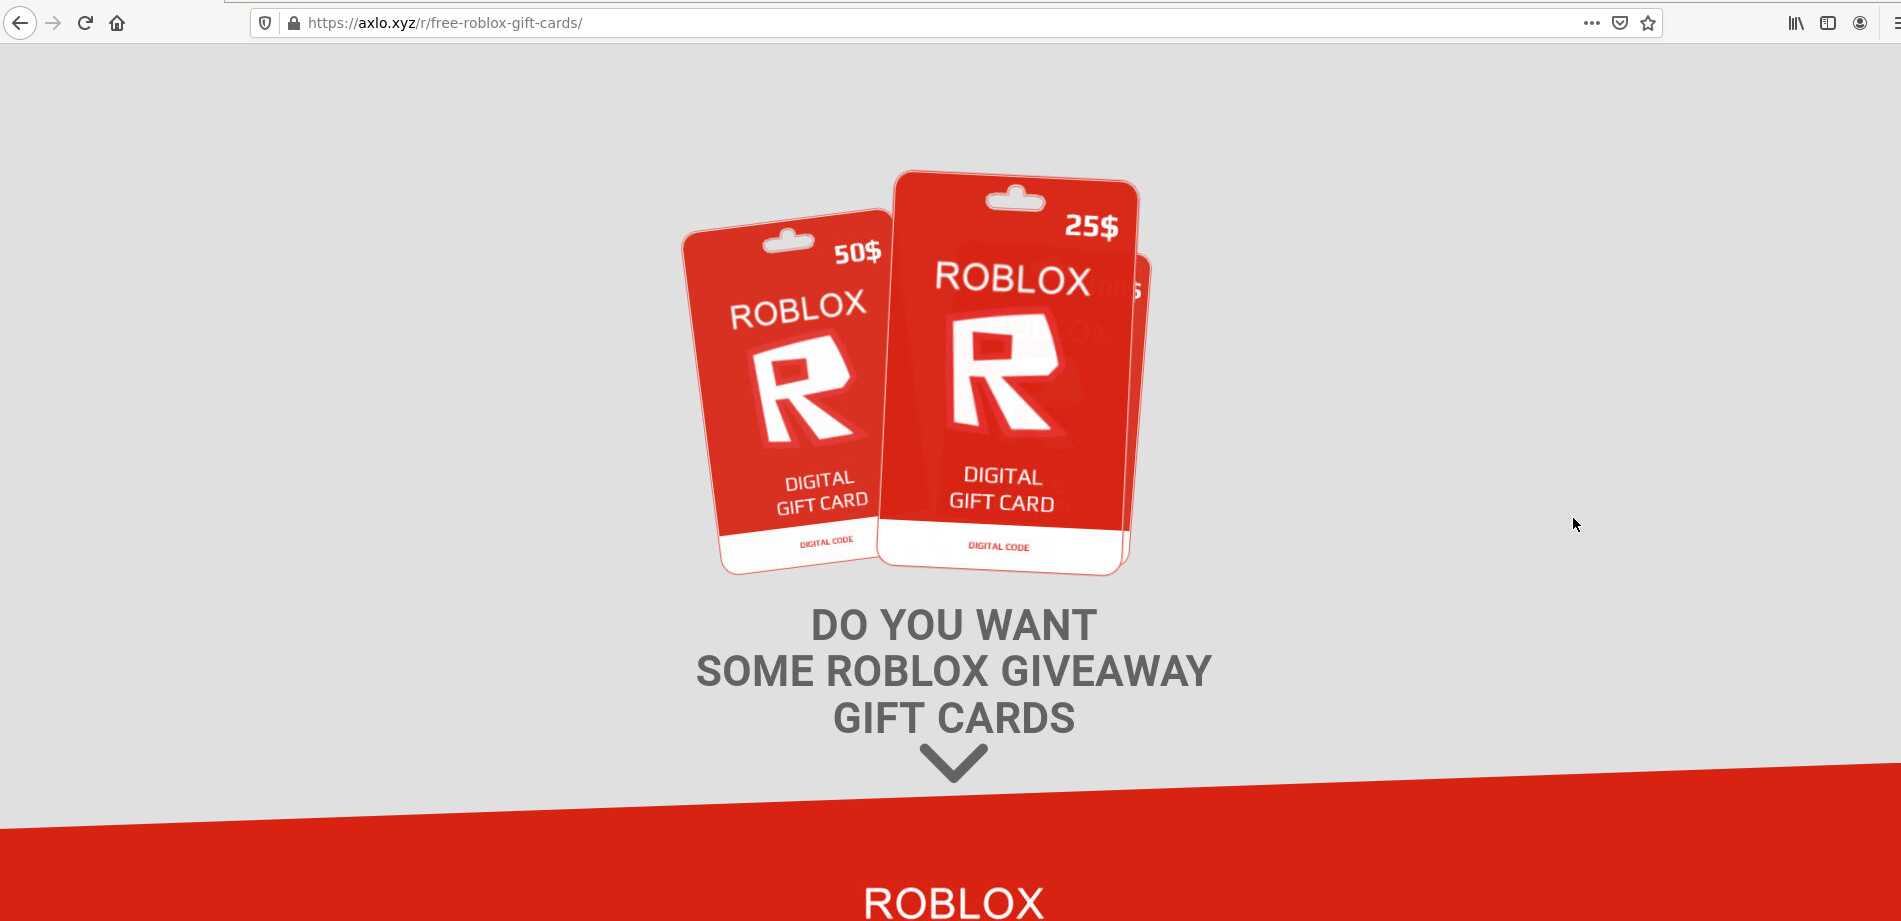 Free Robux SCAM - Phishing - Scammer Info